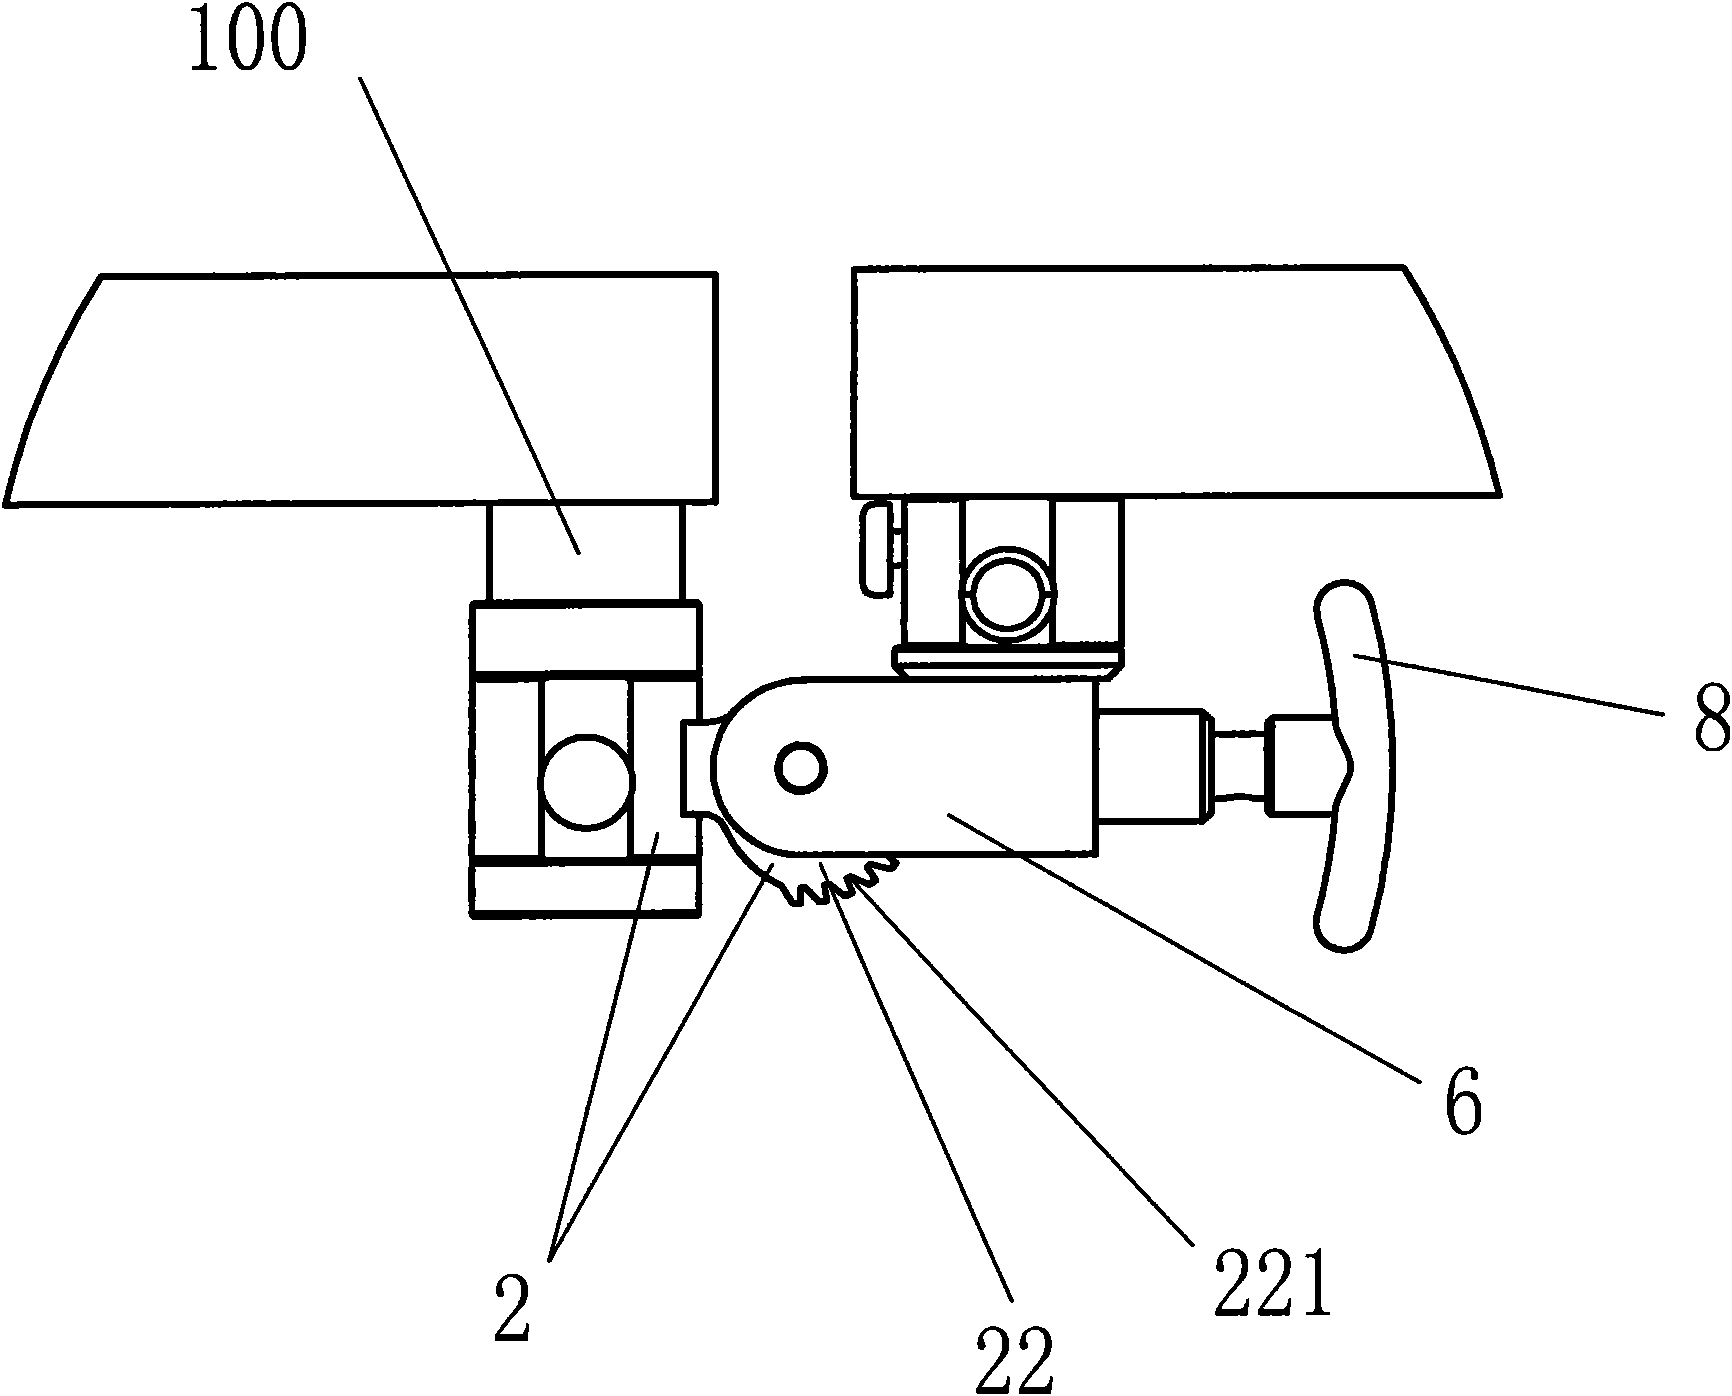 Leg plate structure of medical diagnosis and treatment bench